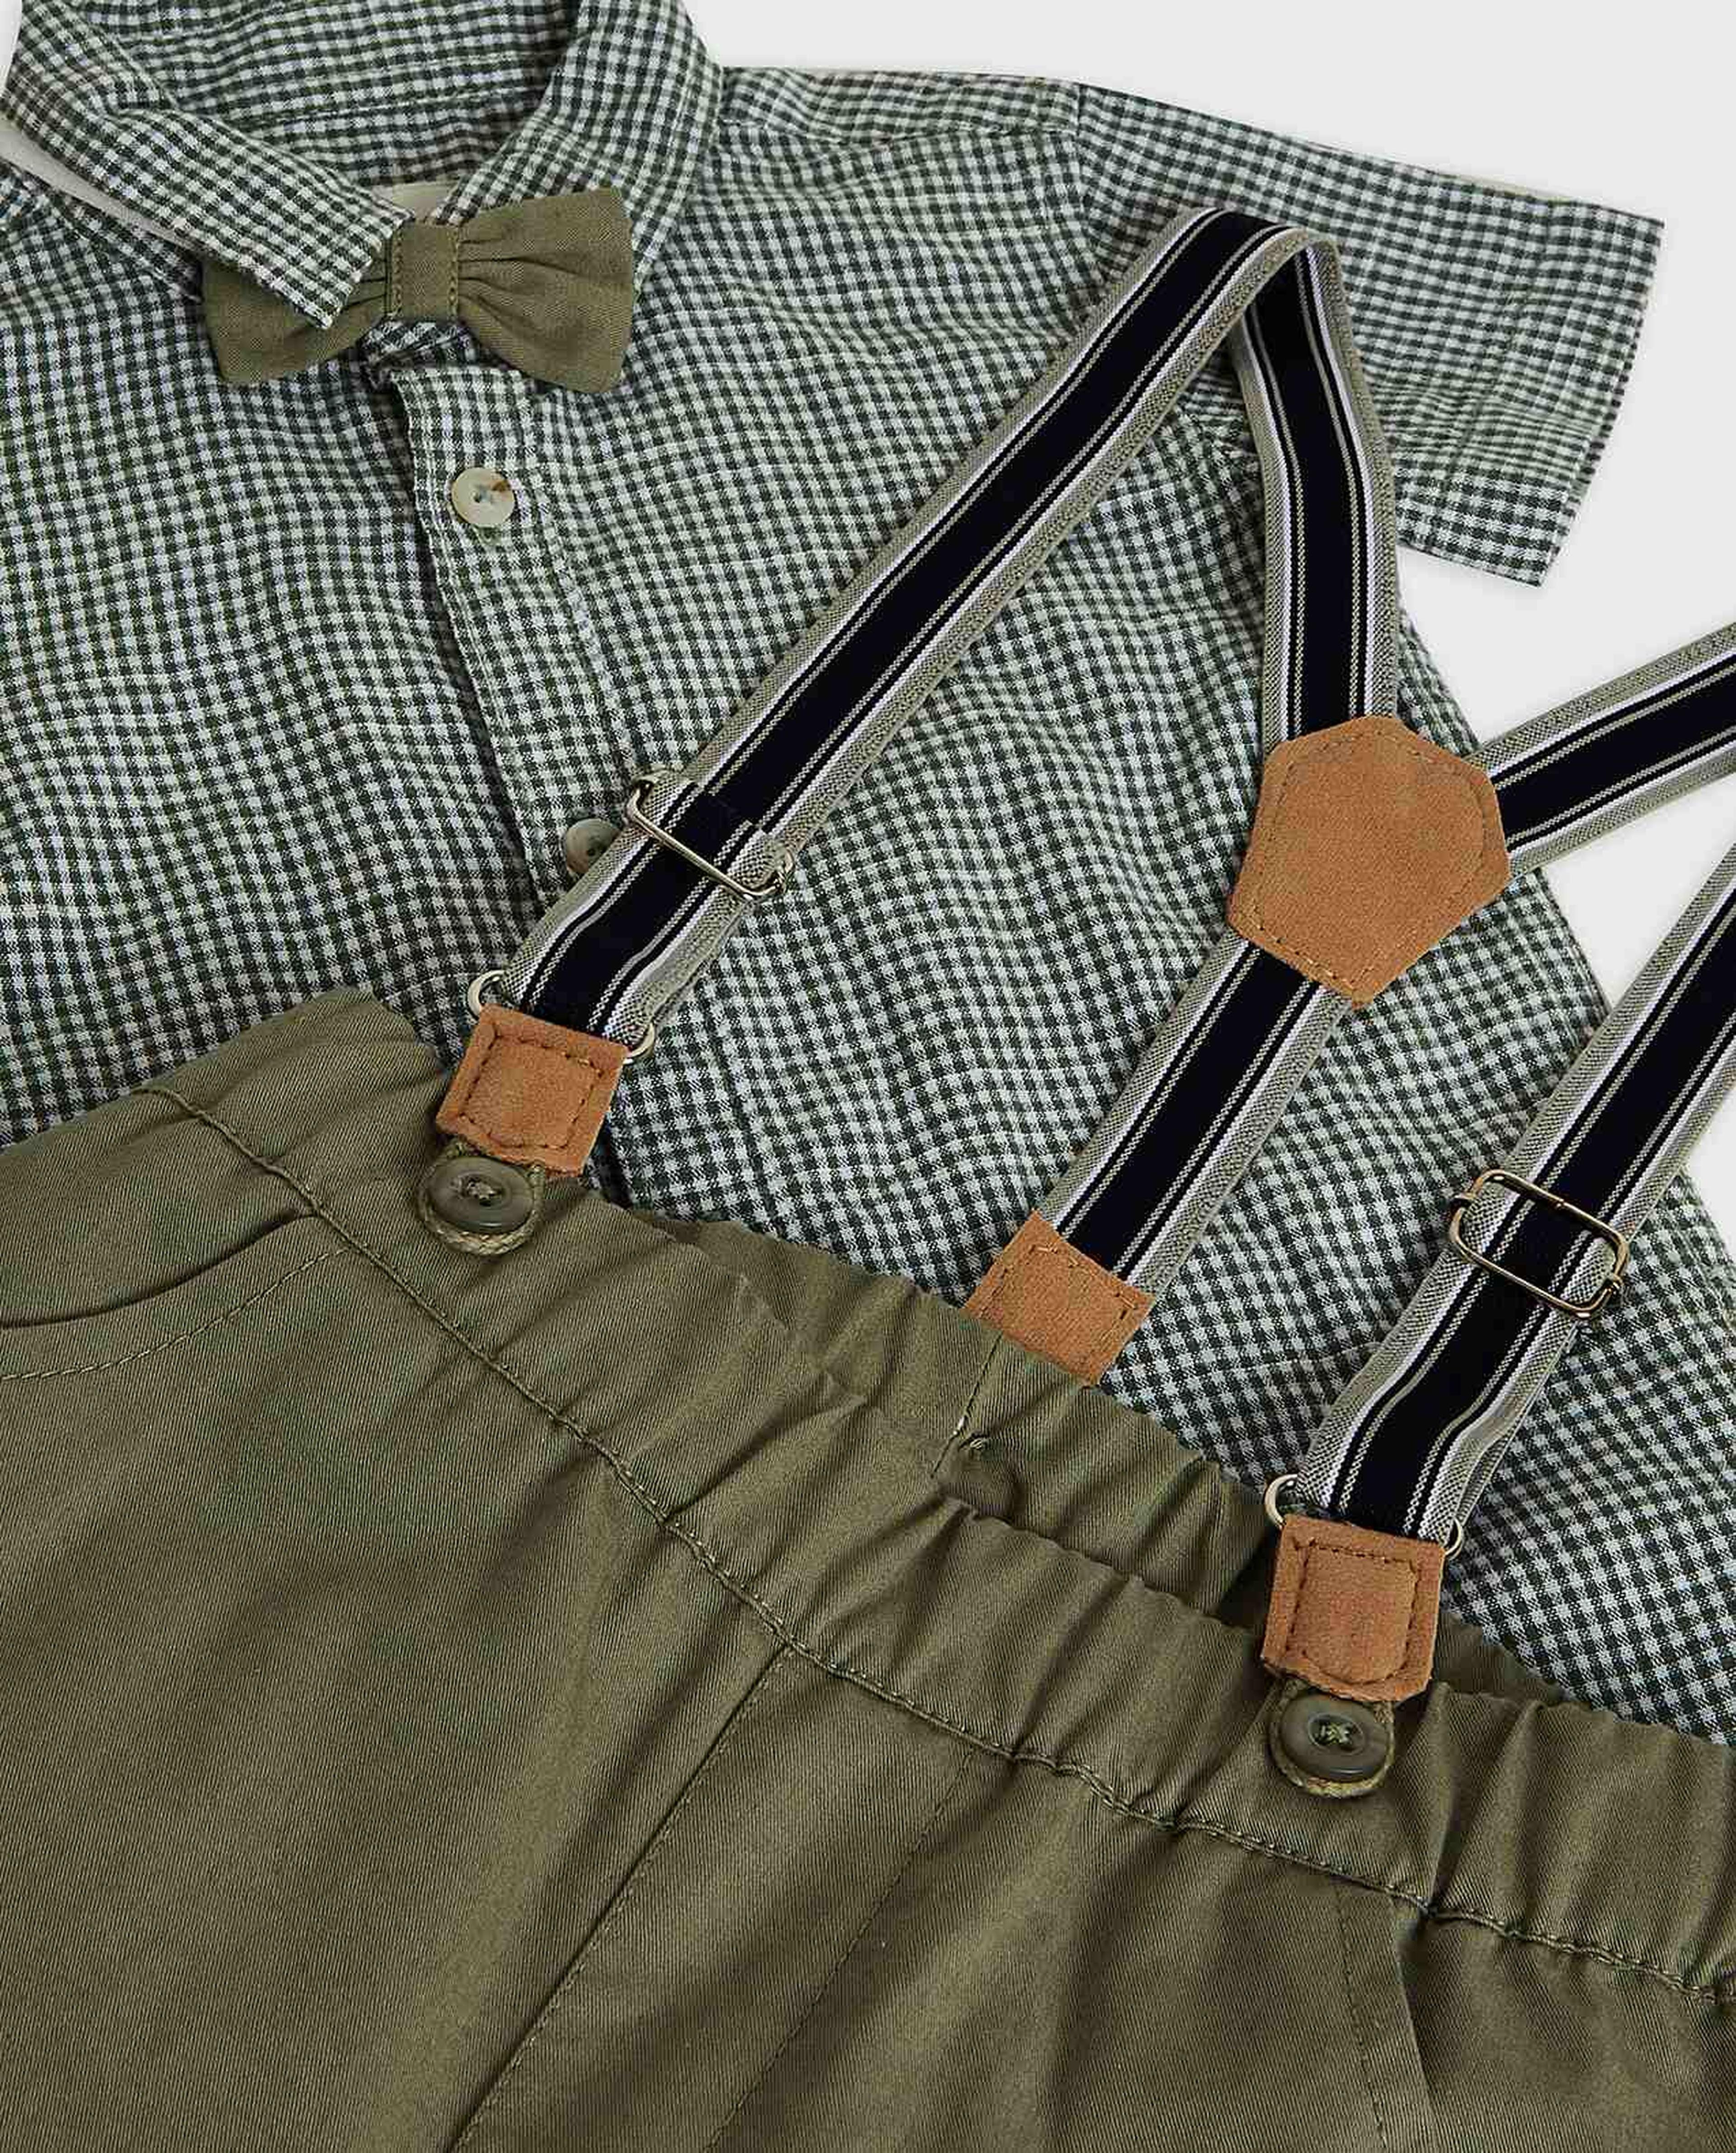 Solid Shirt and Trousers Set with Suspenders